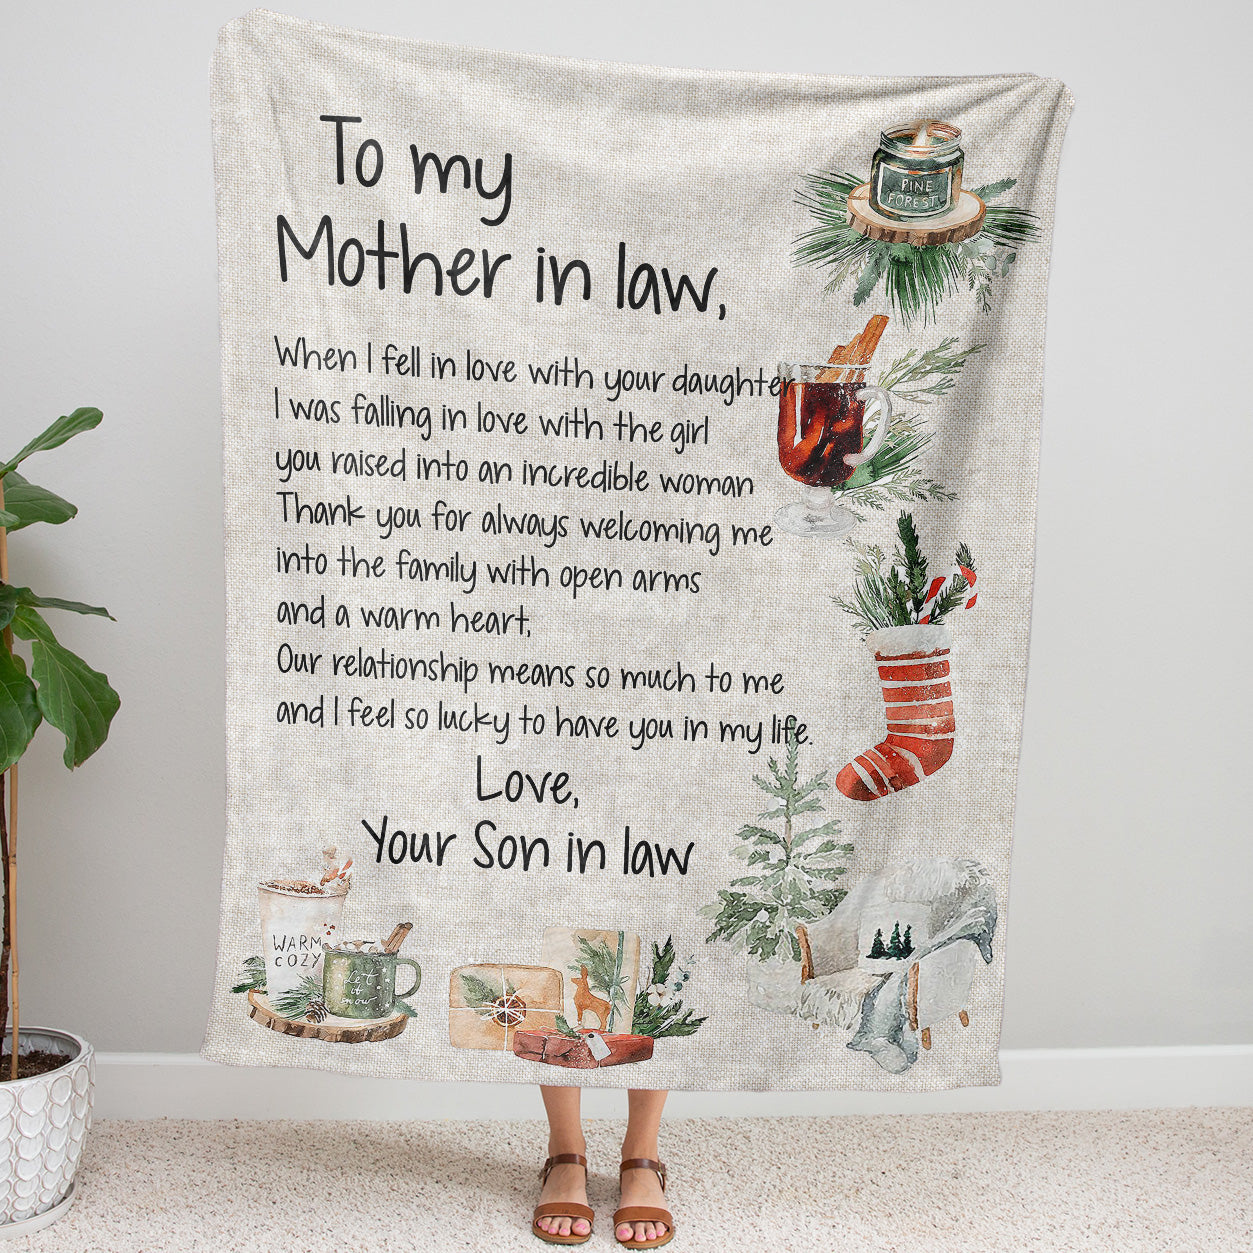 Blanket Christmas Gift ideas for Mother in Law from Son in Law Customize Personalize Love with Your Daughter 20121109 - Sherpa Blanket